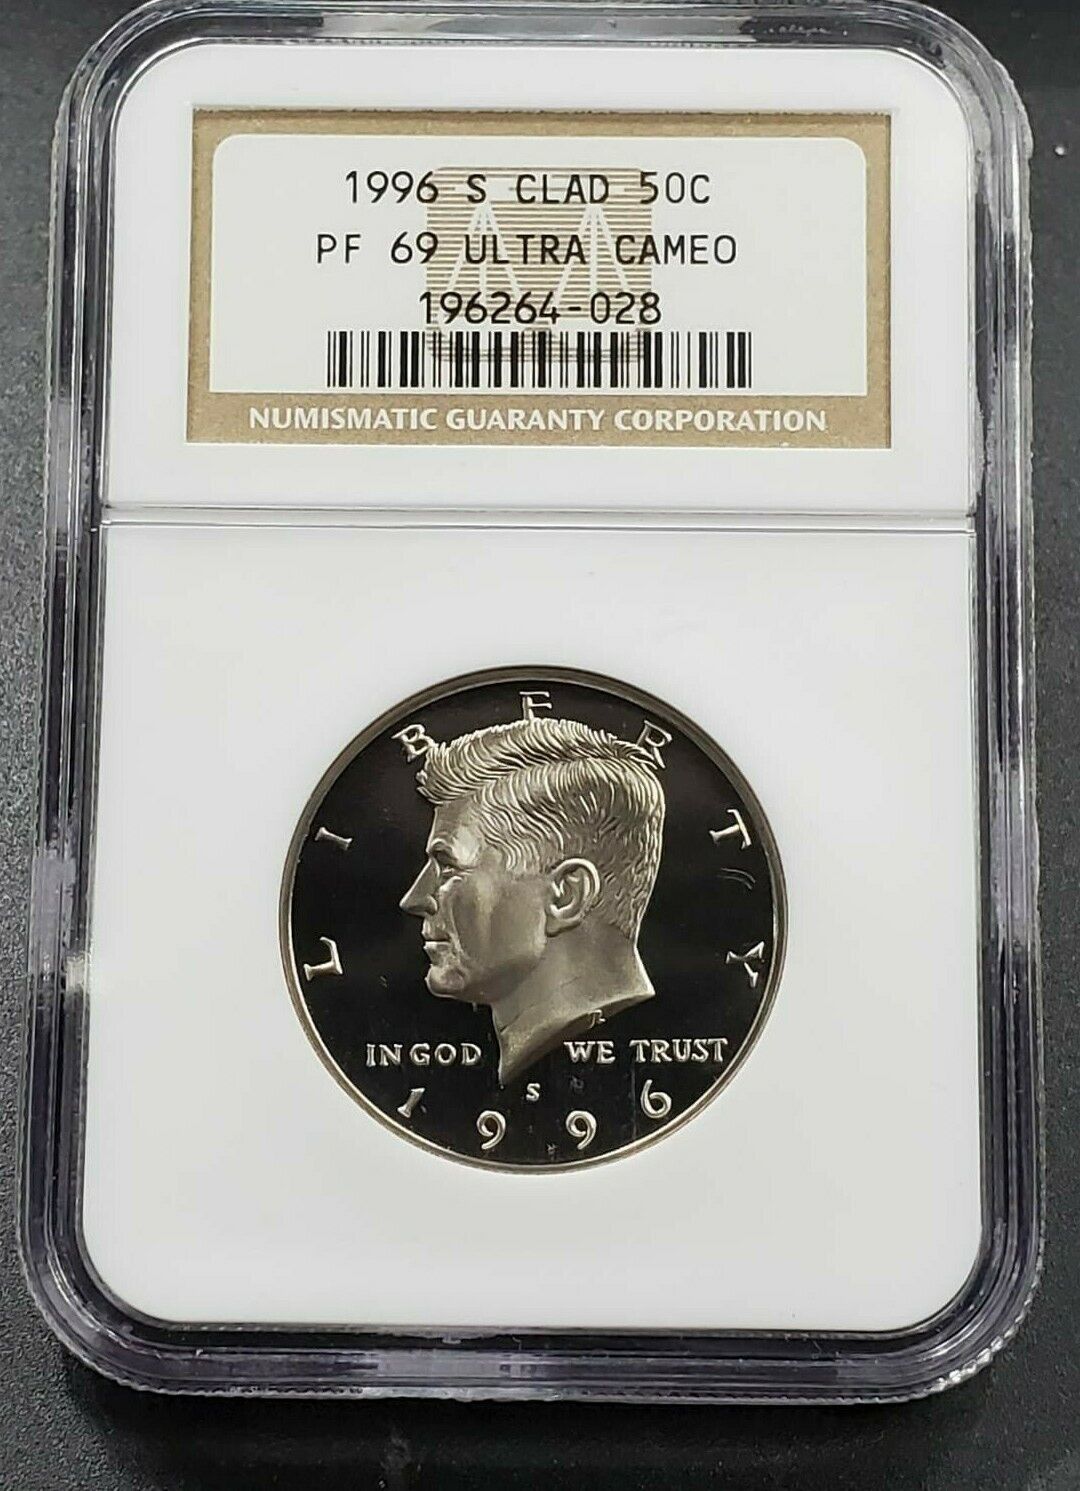 1996 S Kennedy Clad Half Dollar NGC PF69 UCAM Combined Shipping Discounts